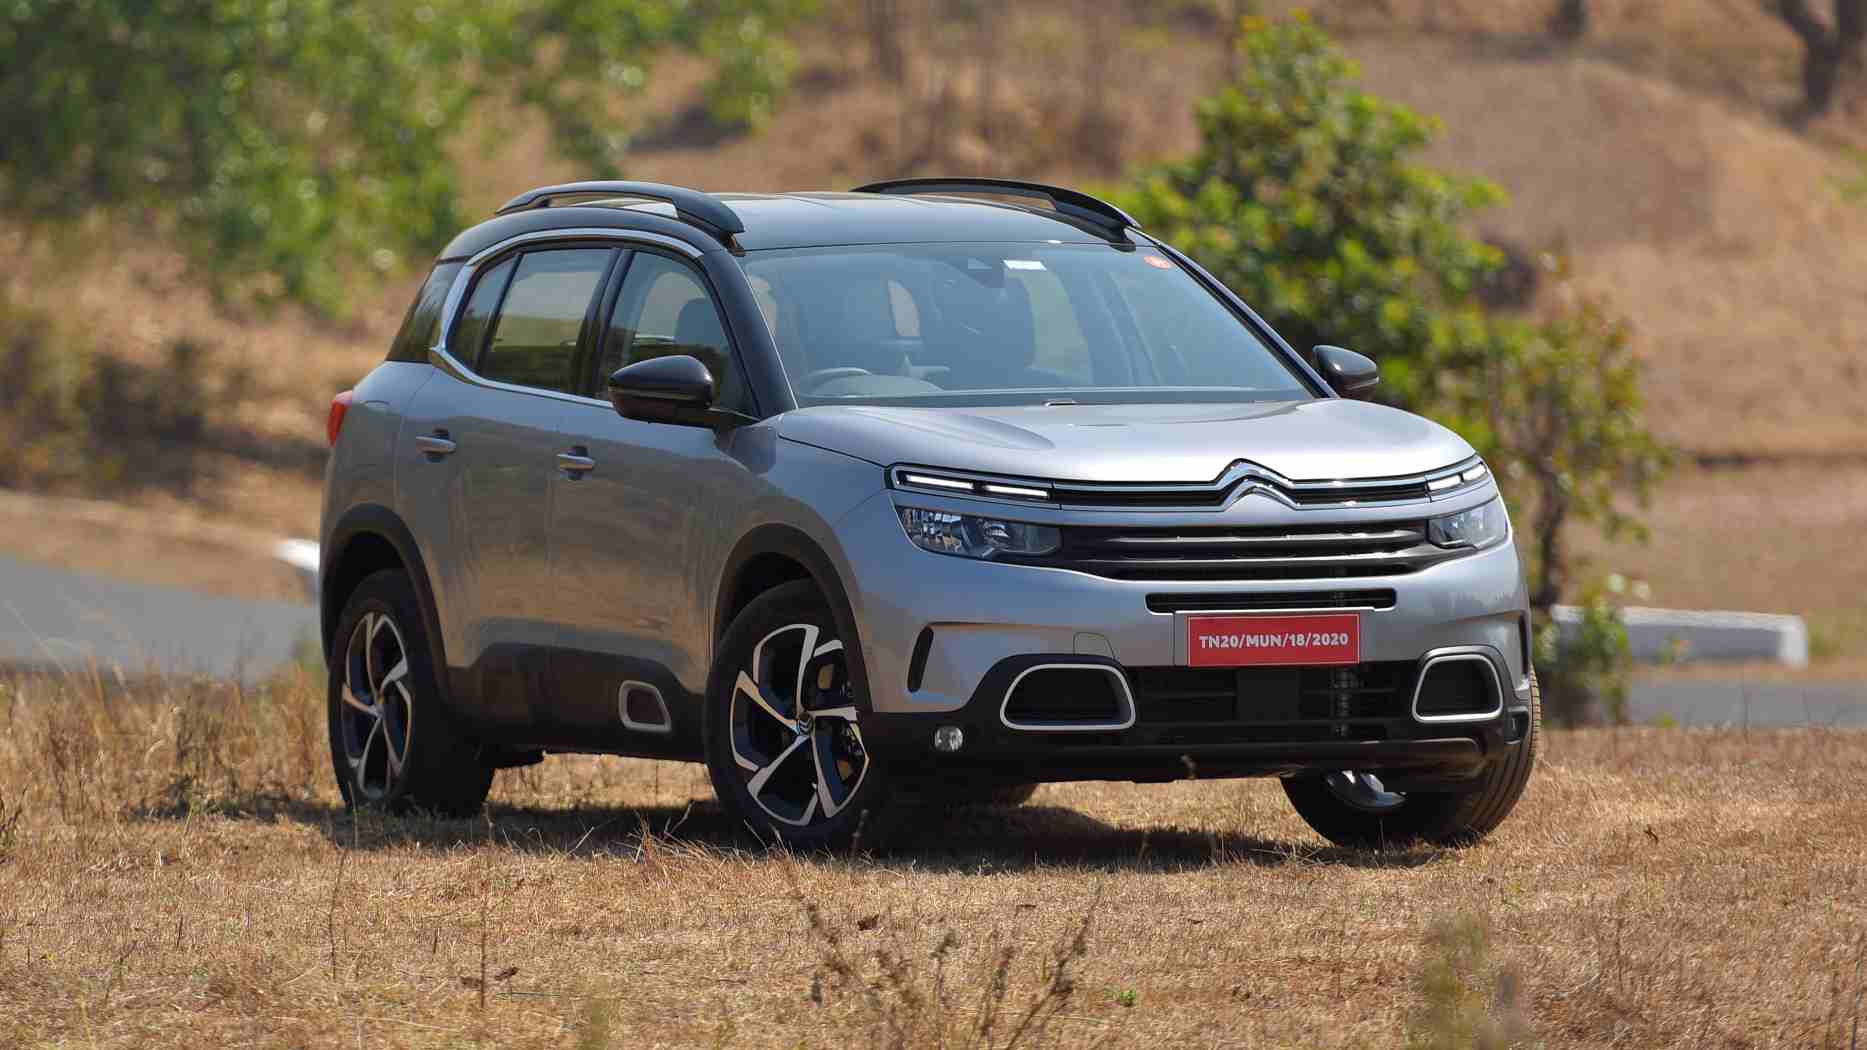  Citroen C5 Aircross India review: Almost magic carpet-like, definitely a great drive